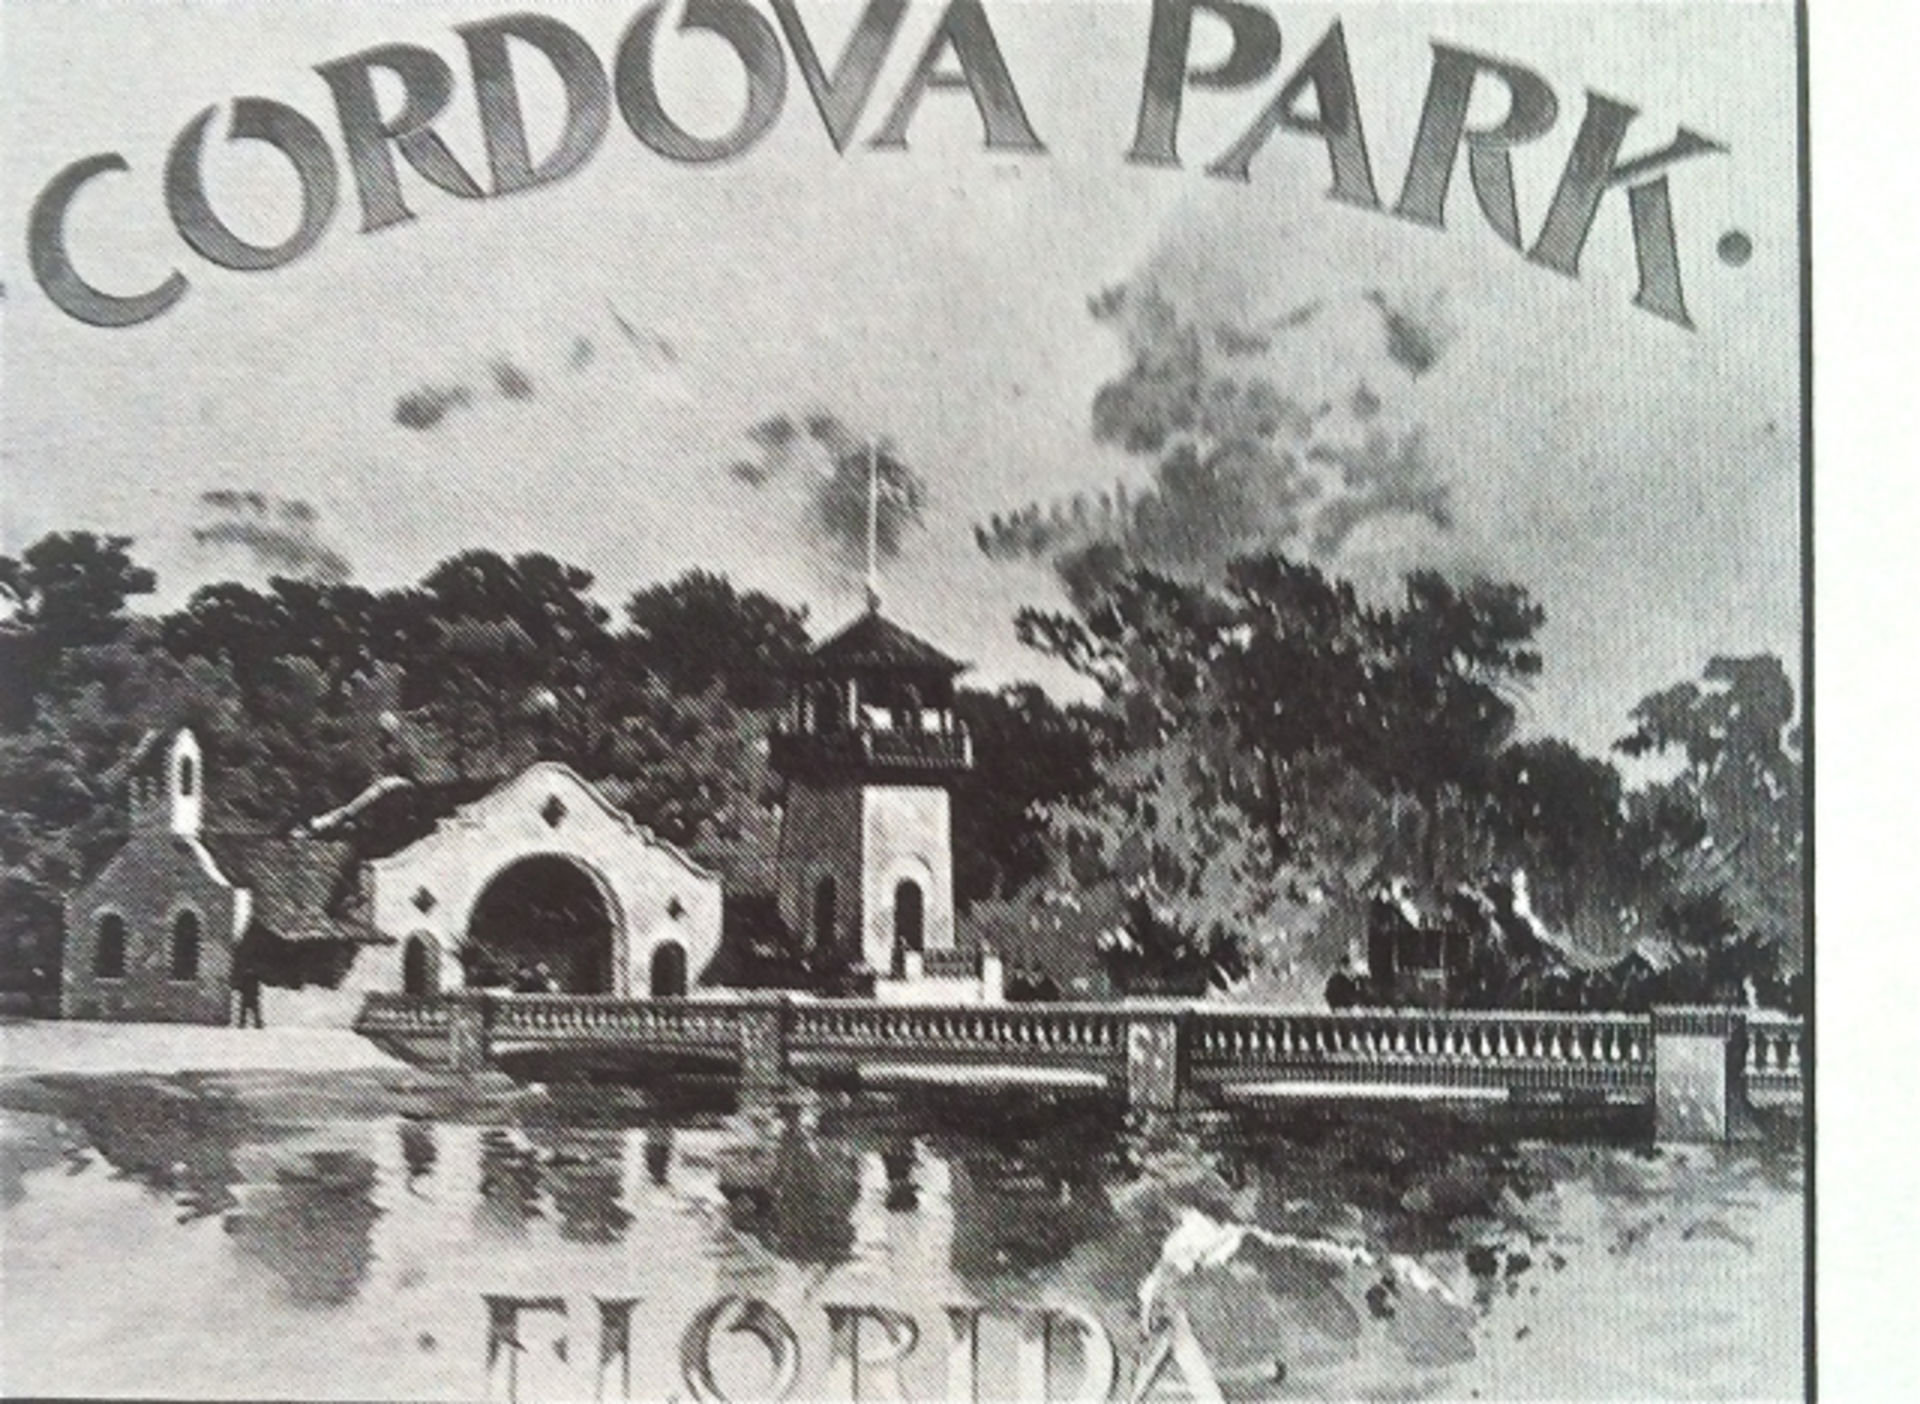 WHY IS IT CALLED CORDOVA PARK?